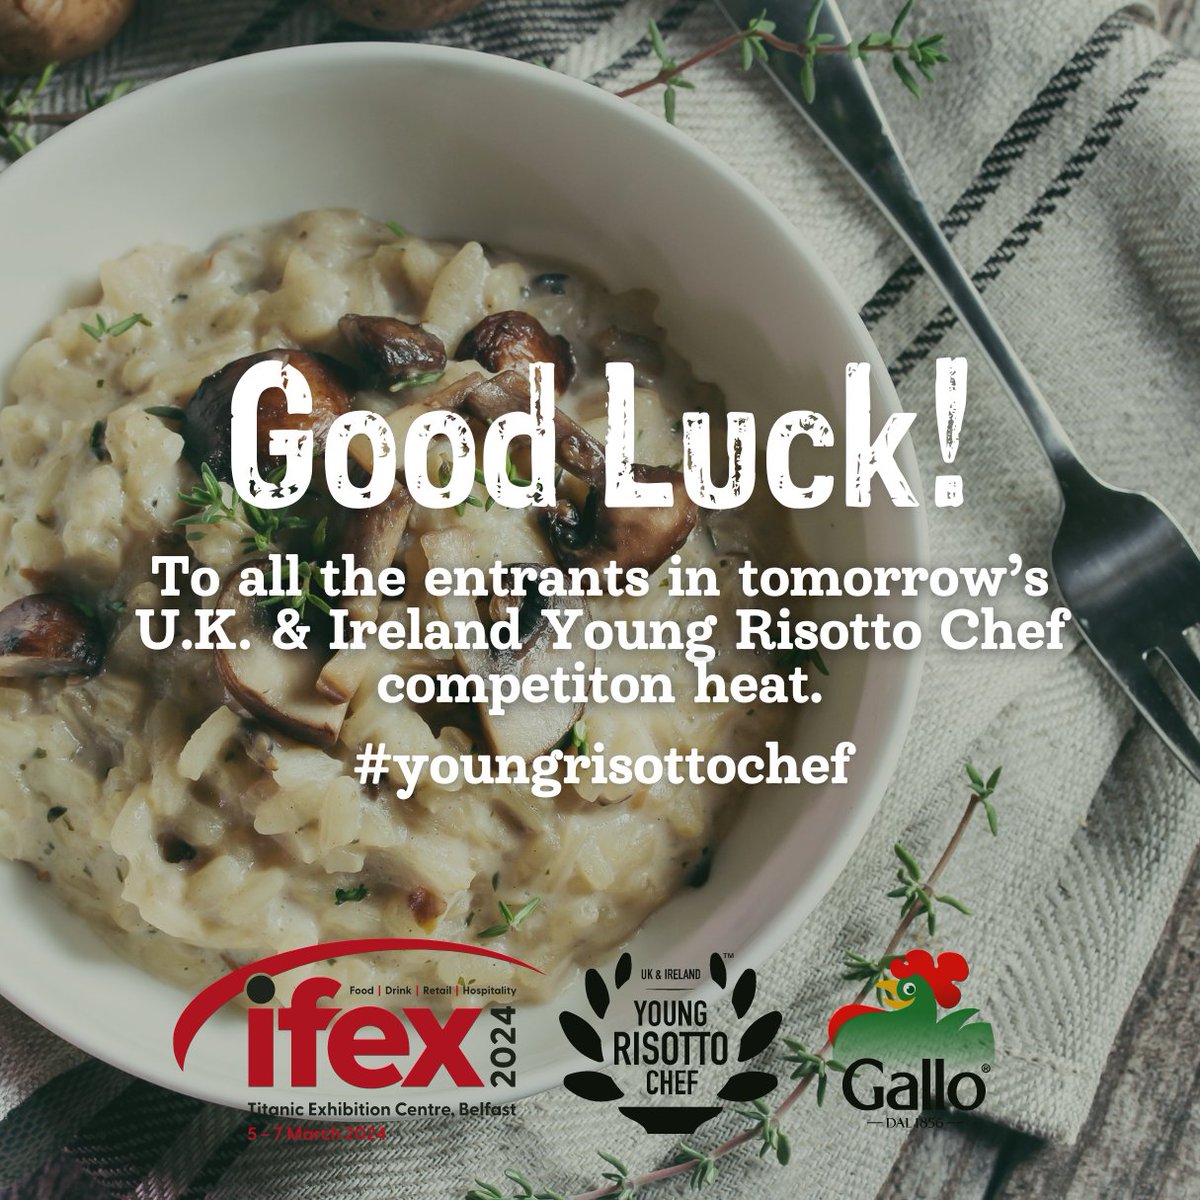 We are so excited for NI & Ireland's Young Risotto Chef heat at iFex Exhibition tomorrow! Good luck to all the entrants. #youngrisottochef #RisoGallo